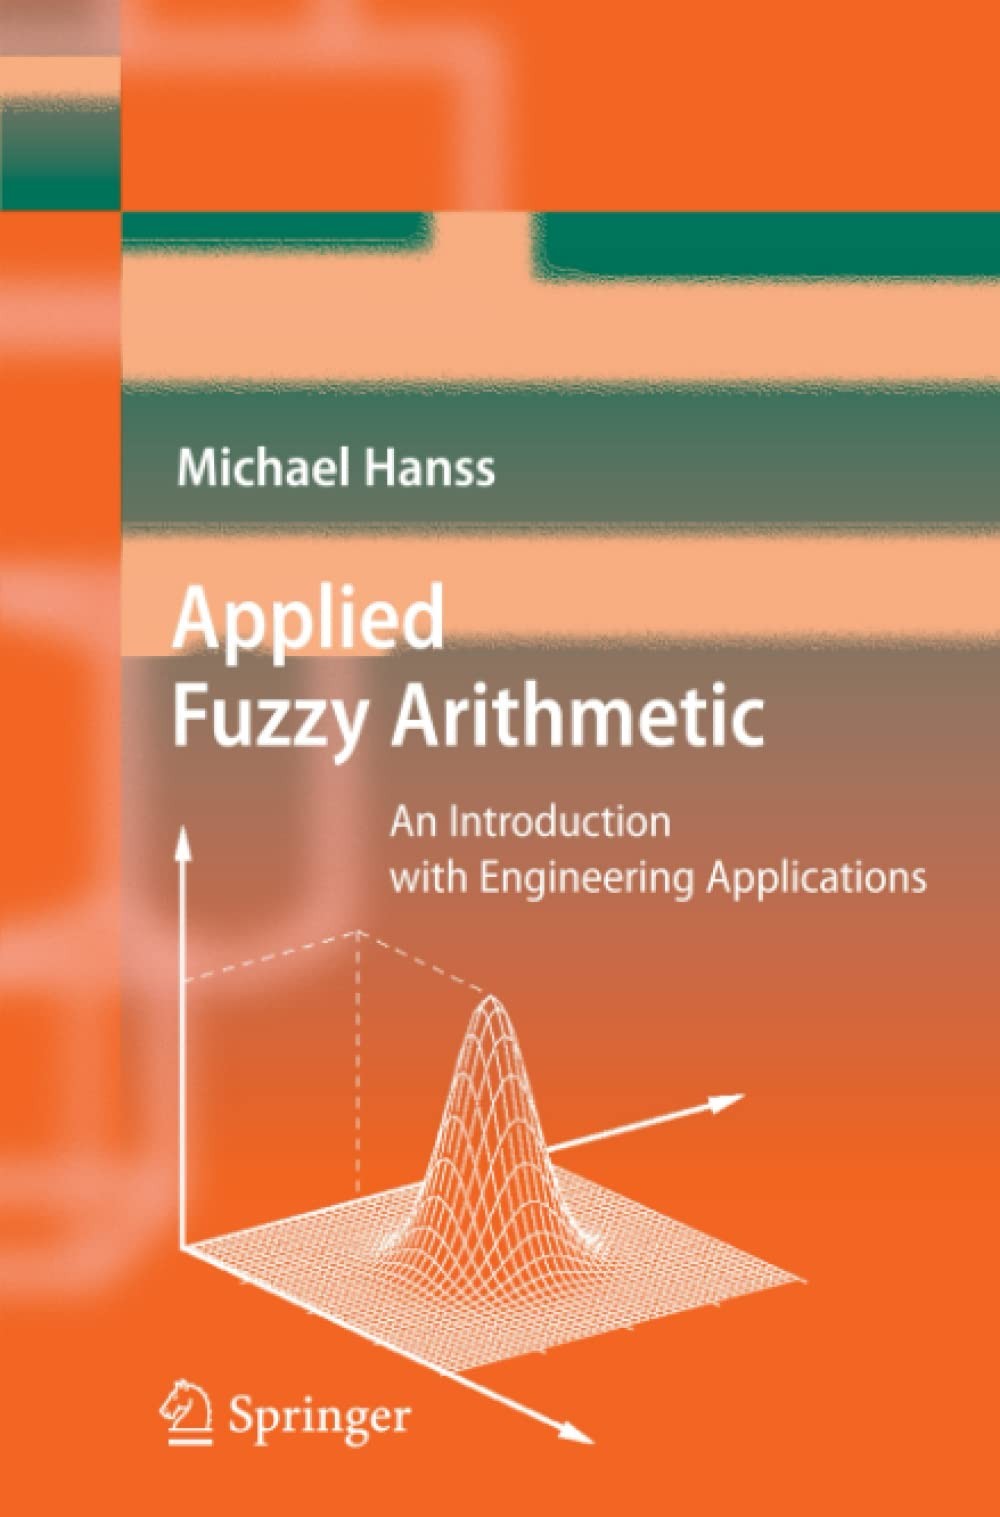 Applied Fuzzy Arithmetic: An Introduction with Engineering Applications